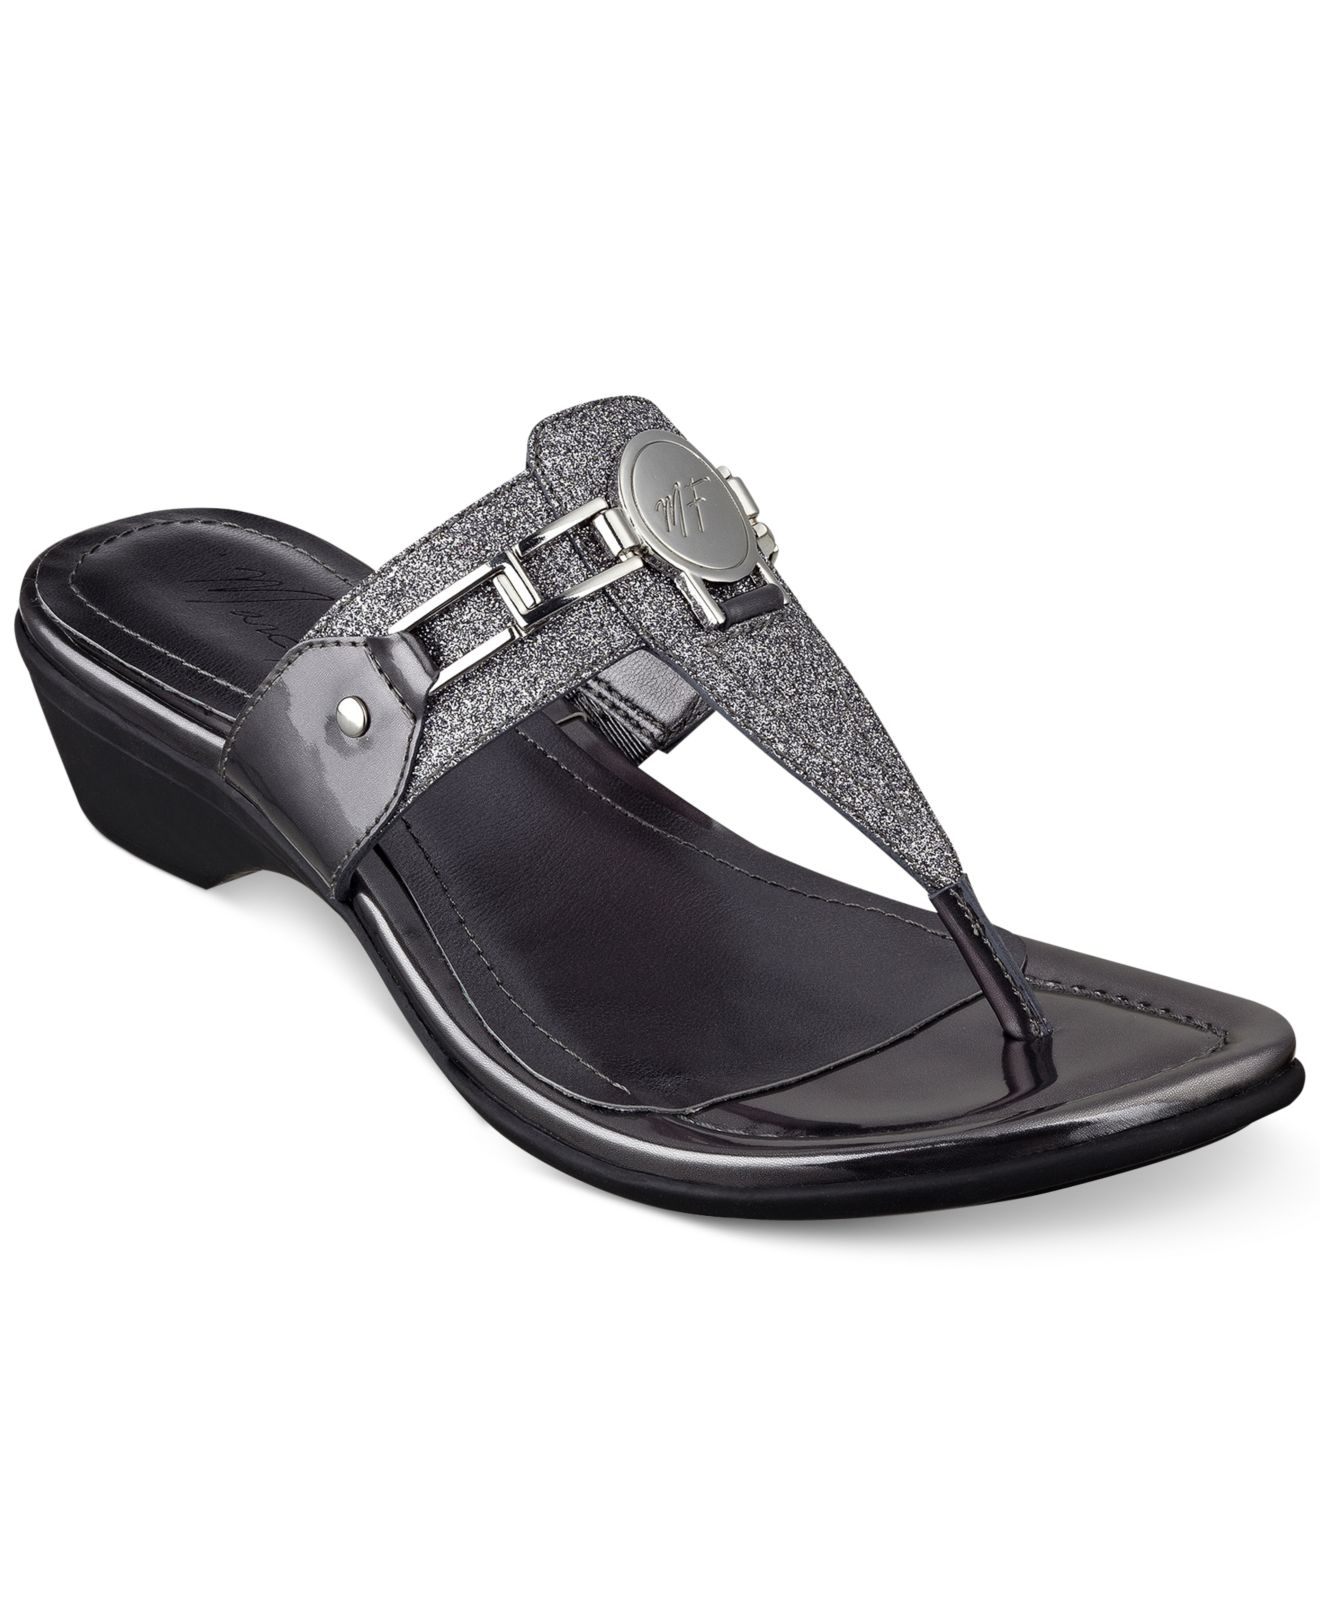 Marc fisher Amina Thong Sandals in Metallic Lyst